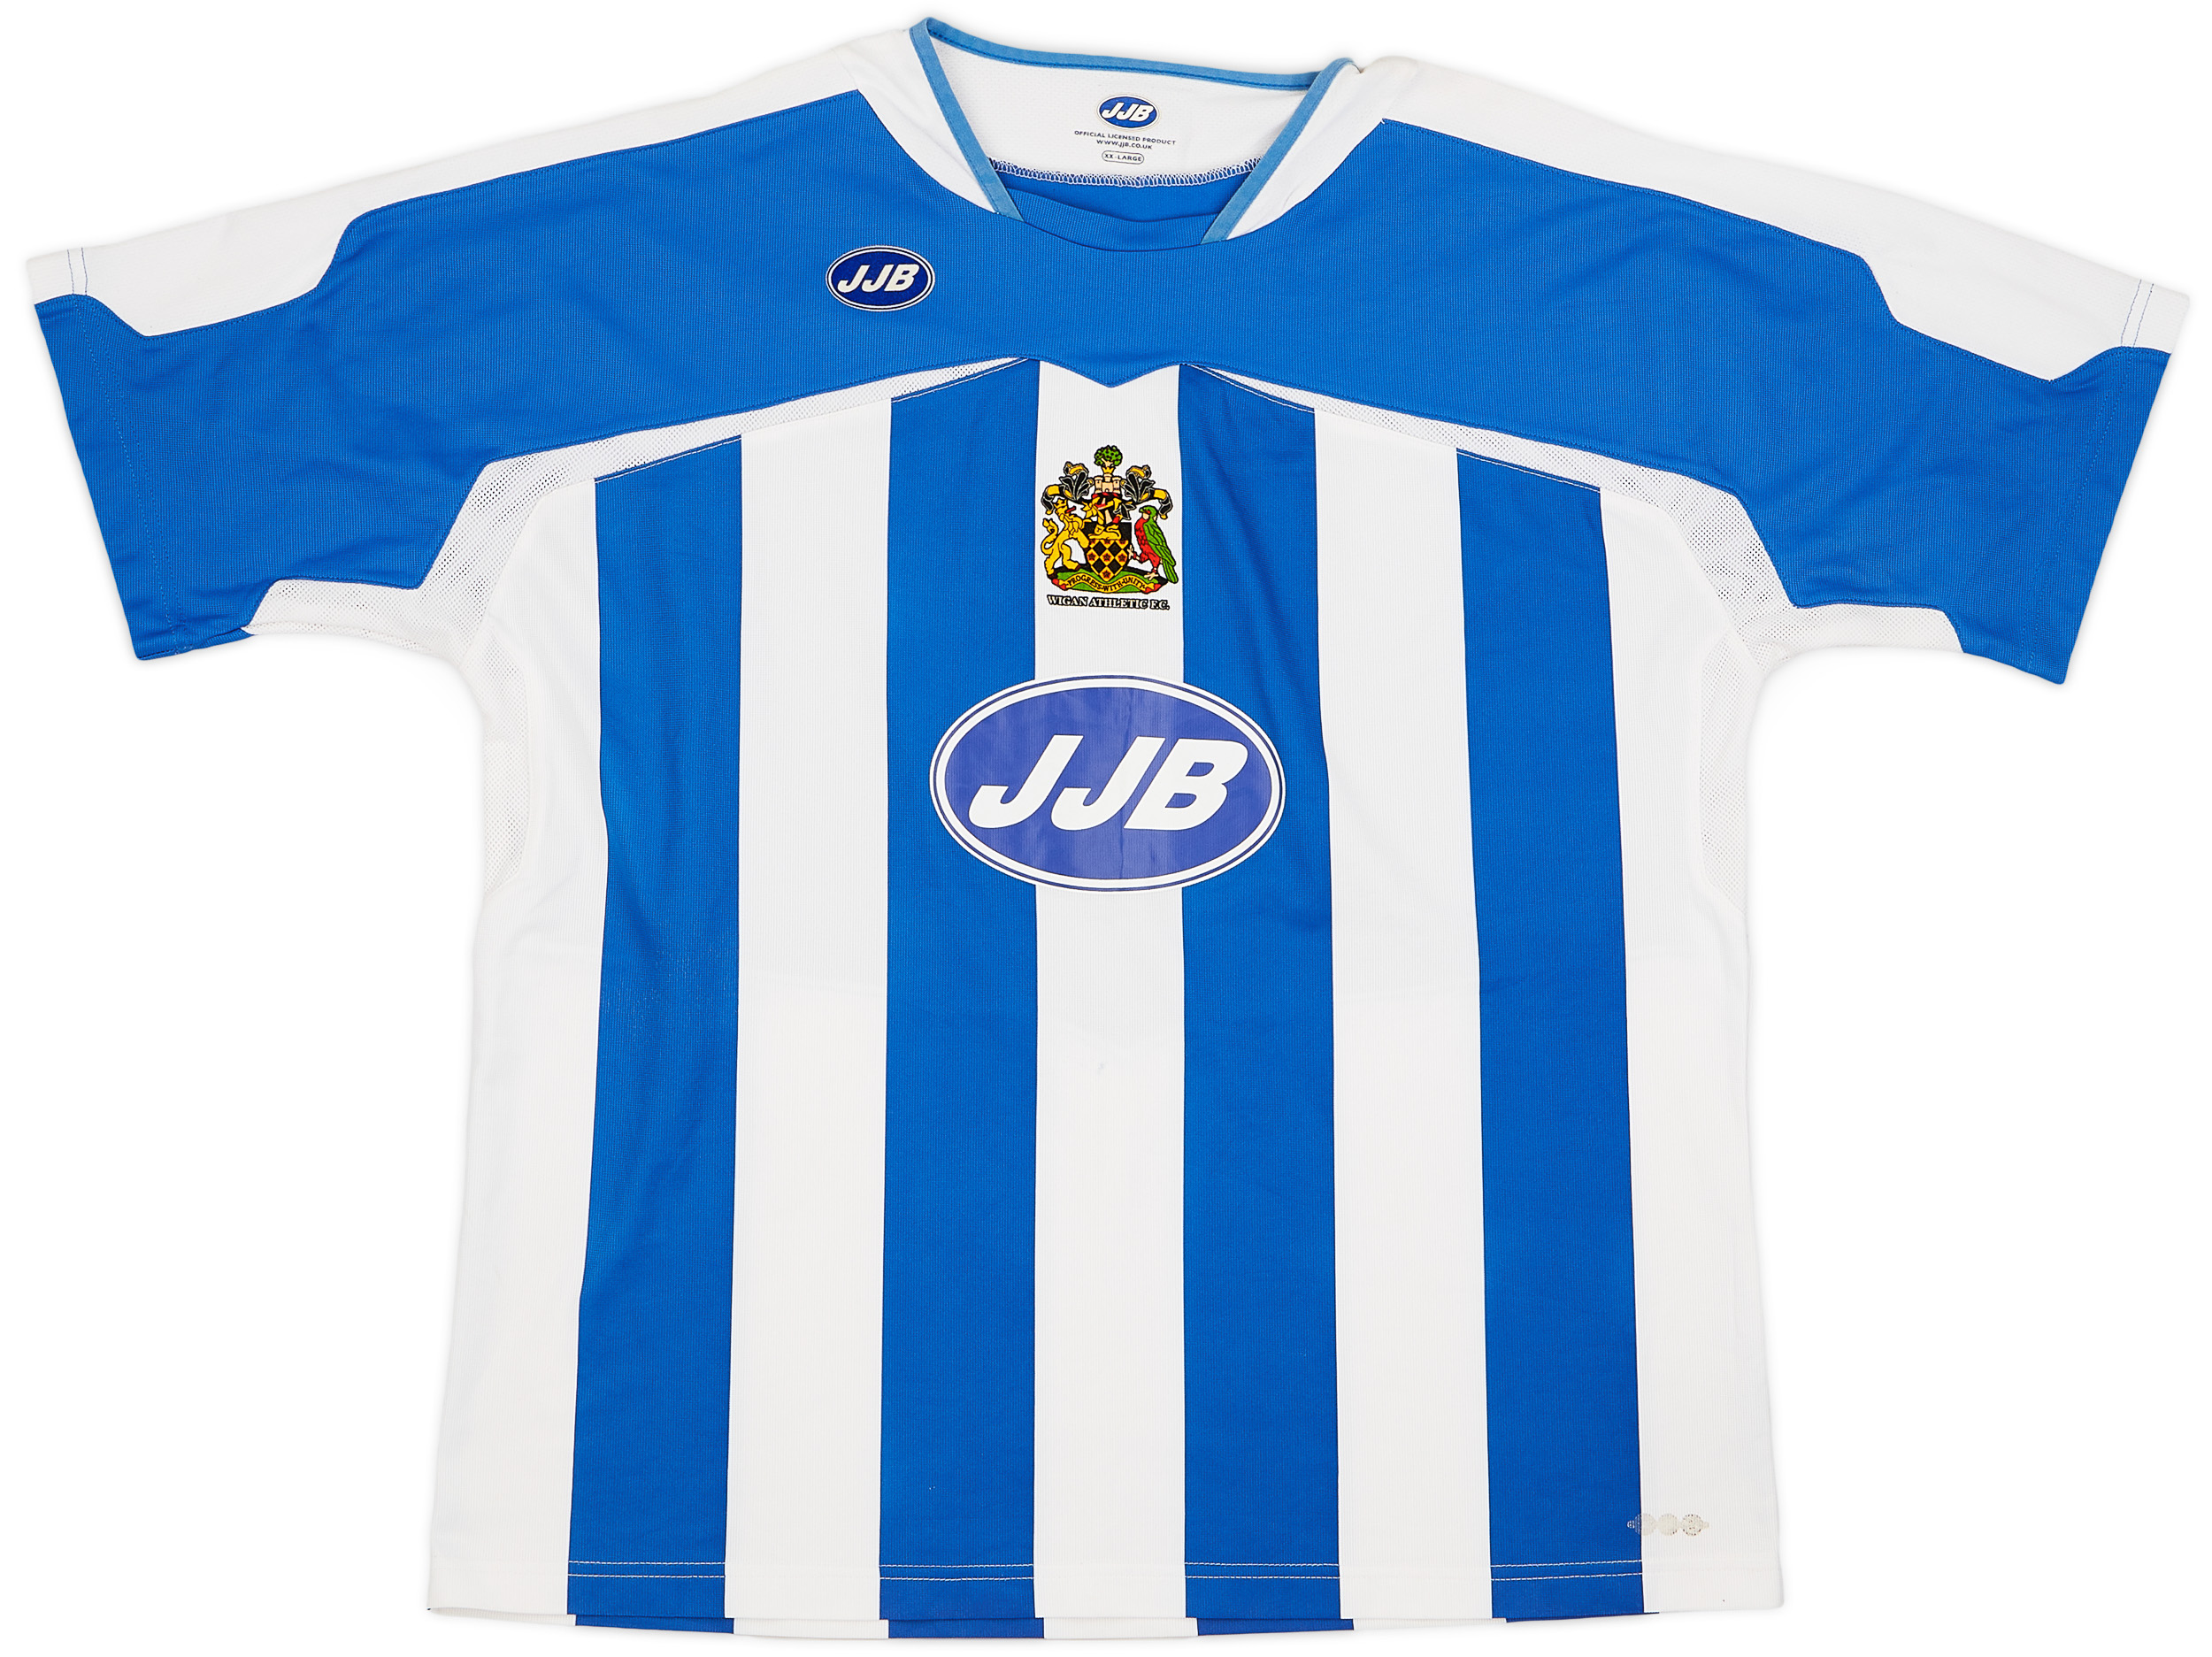 2005-06 Wigan Athletic Home Shirt - 8/10 - ()